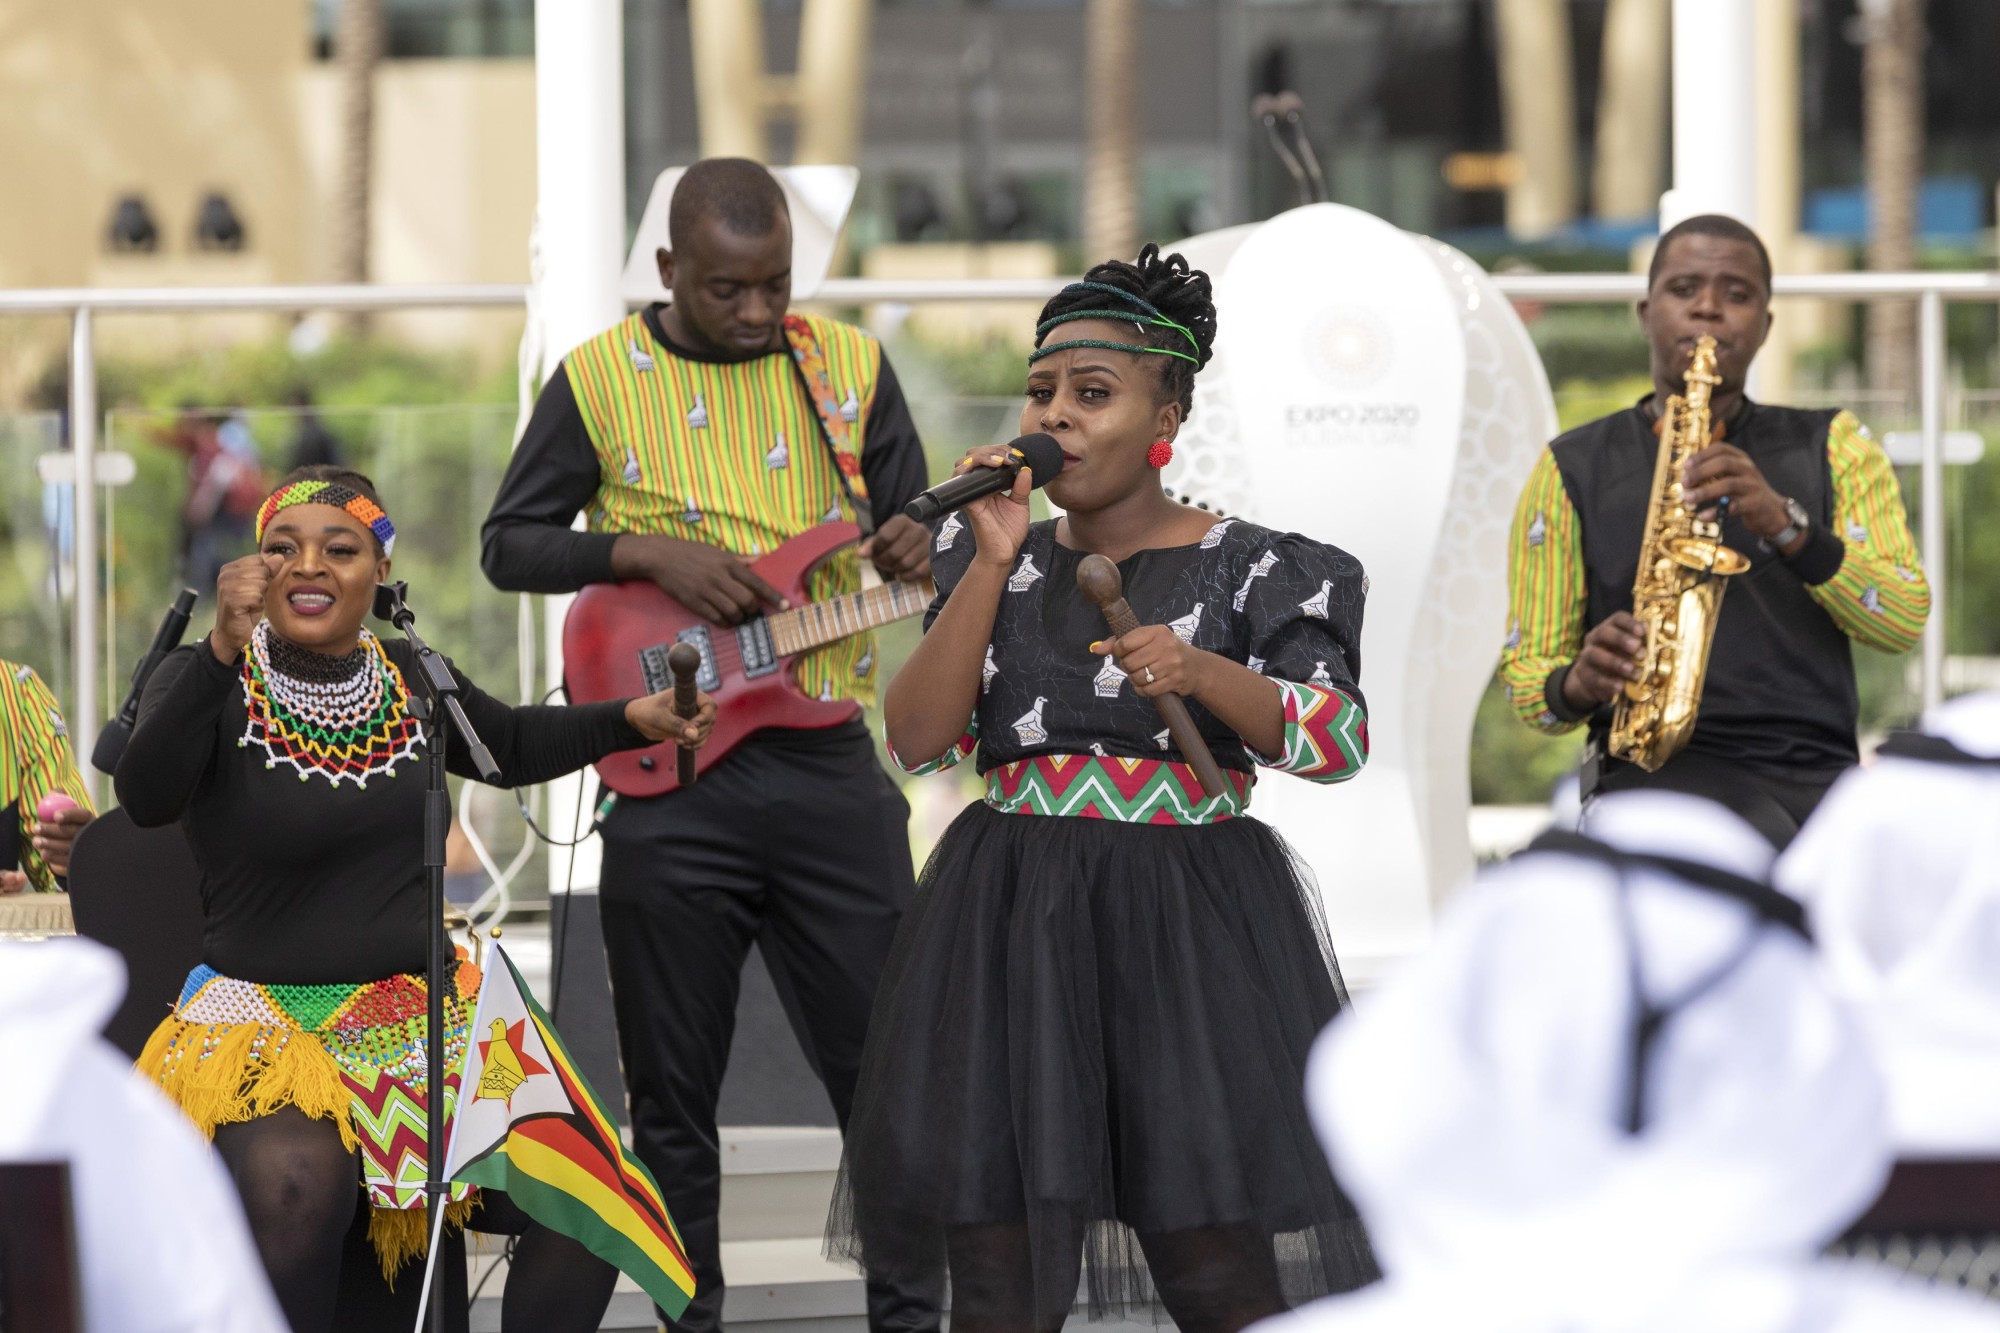 Cultural performance during the Zimbabwe National Day Ceremony at Al Wasl m62919